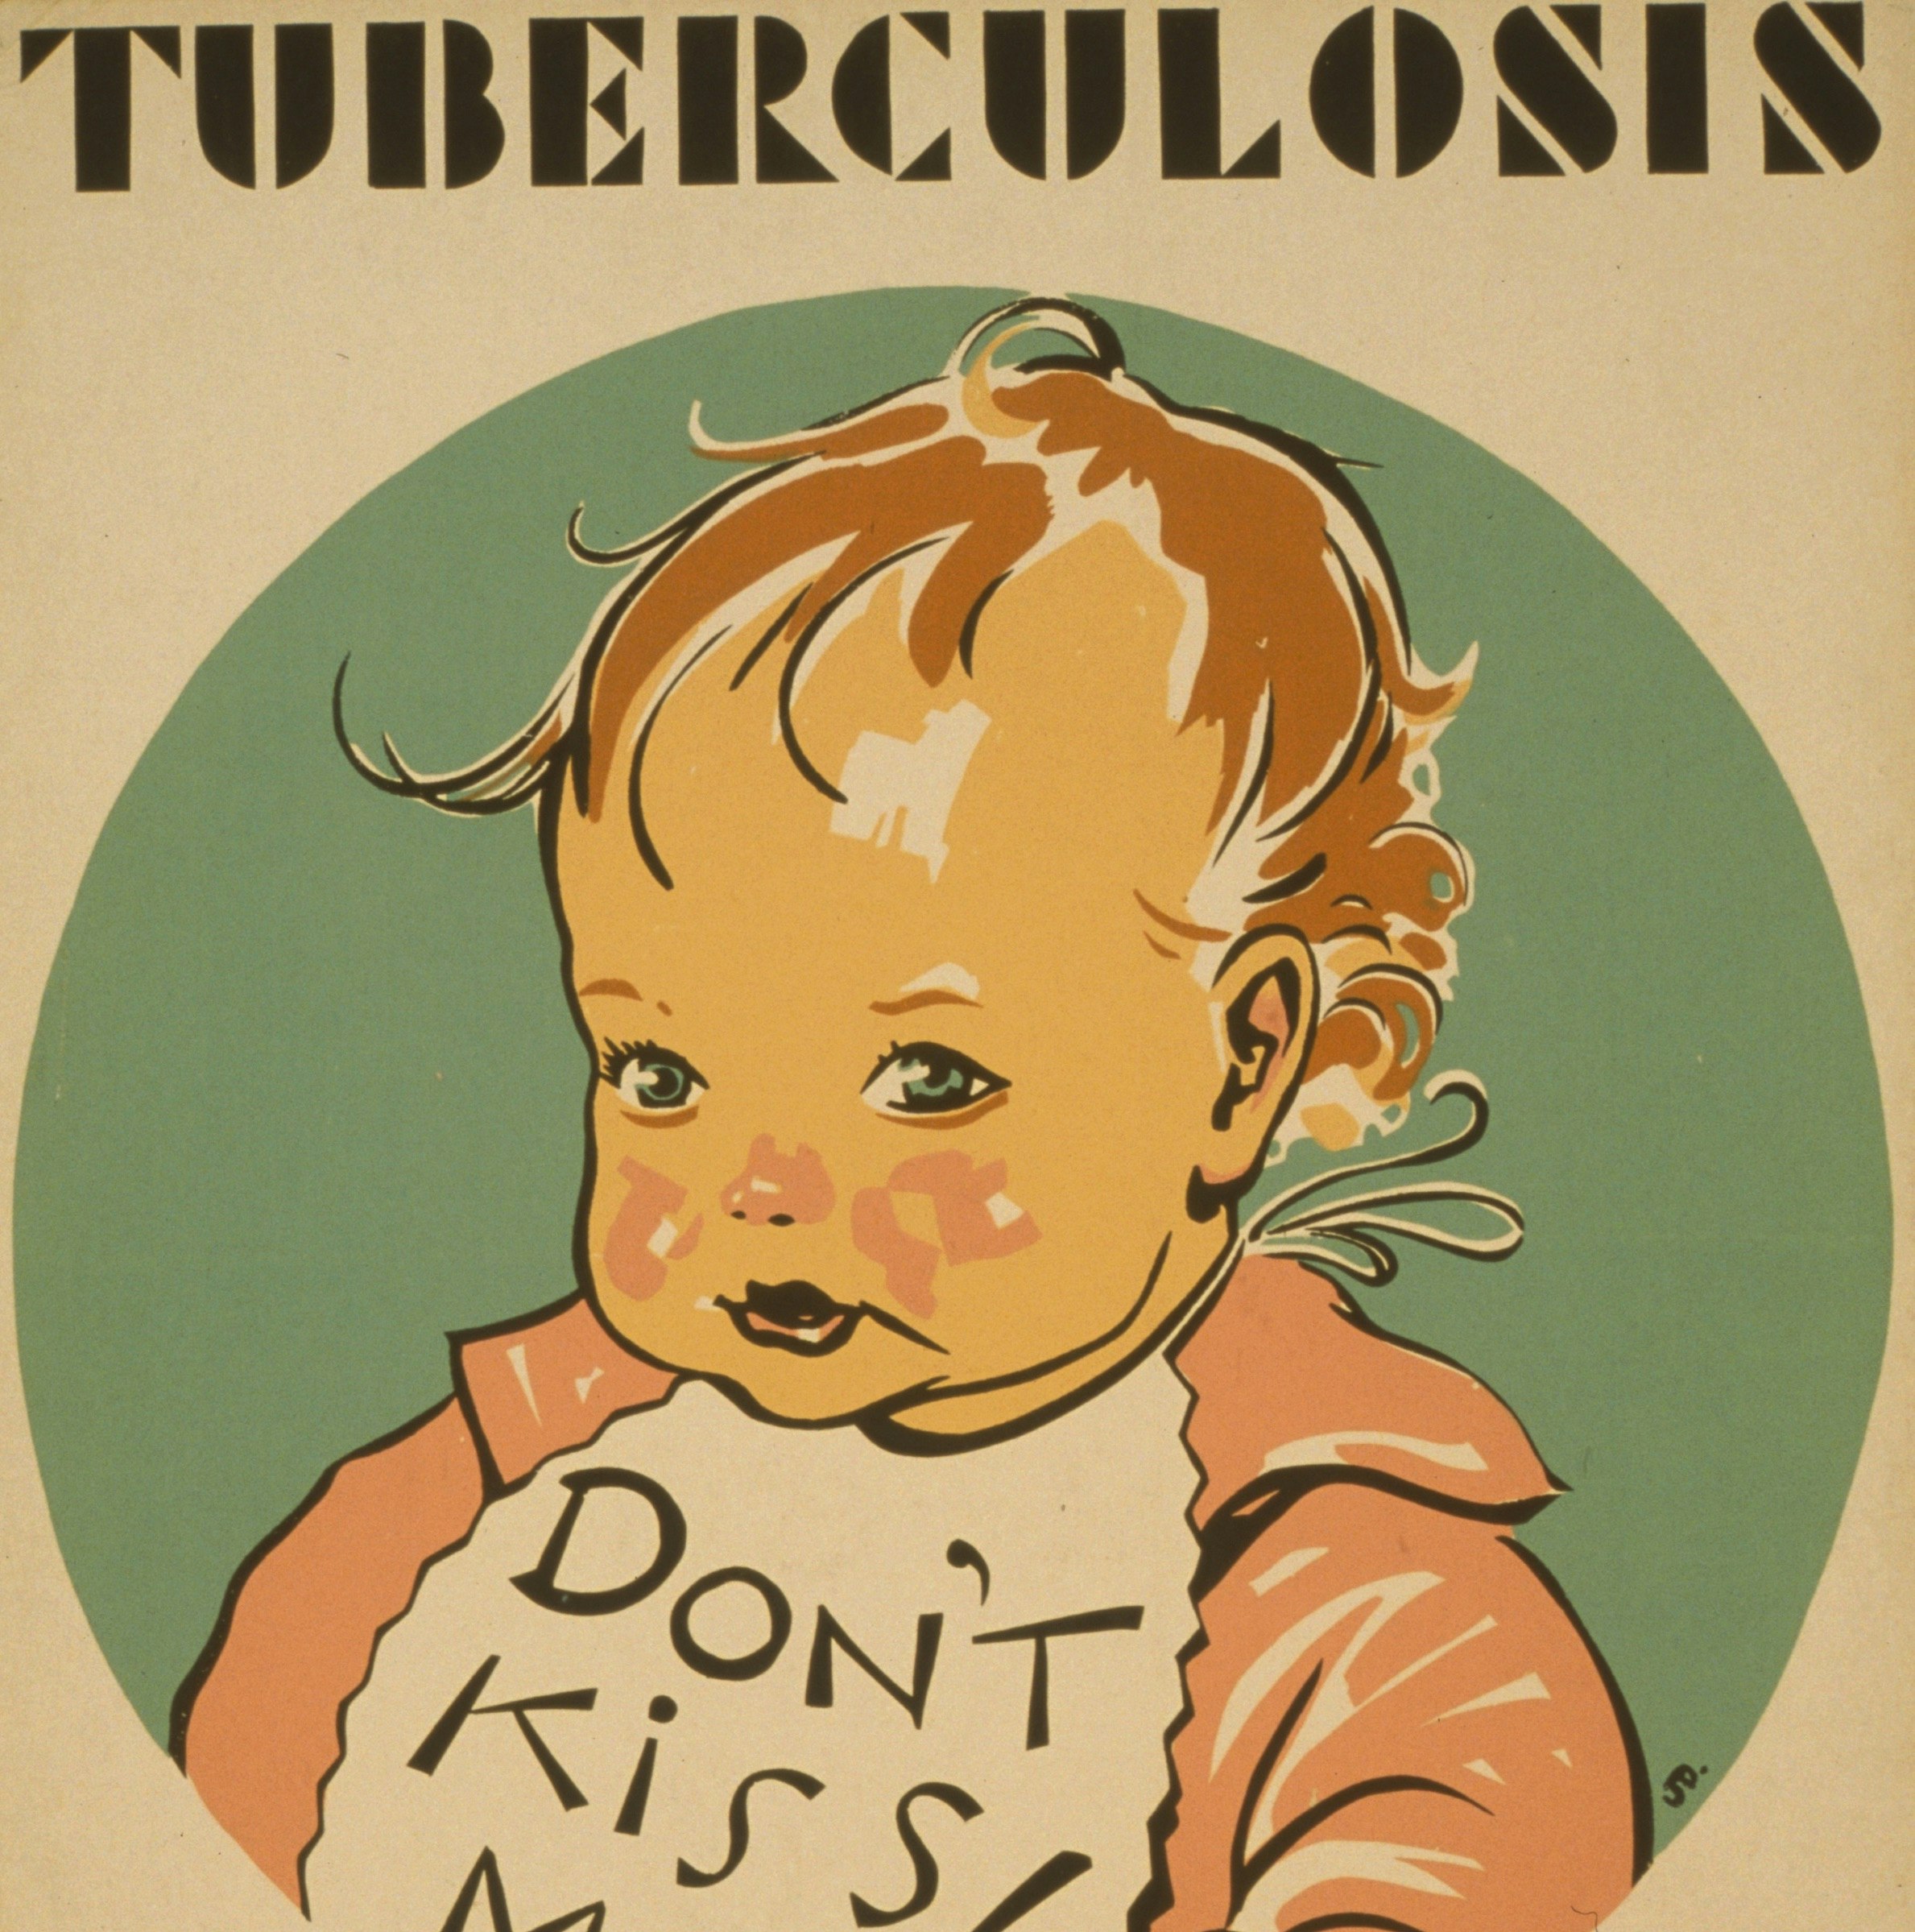 An anti-tuberculosis poster, with a baby wearing a bib saying "Don't kiss me!"